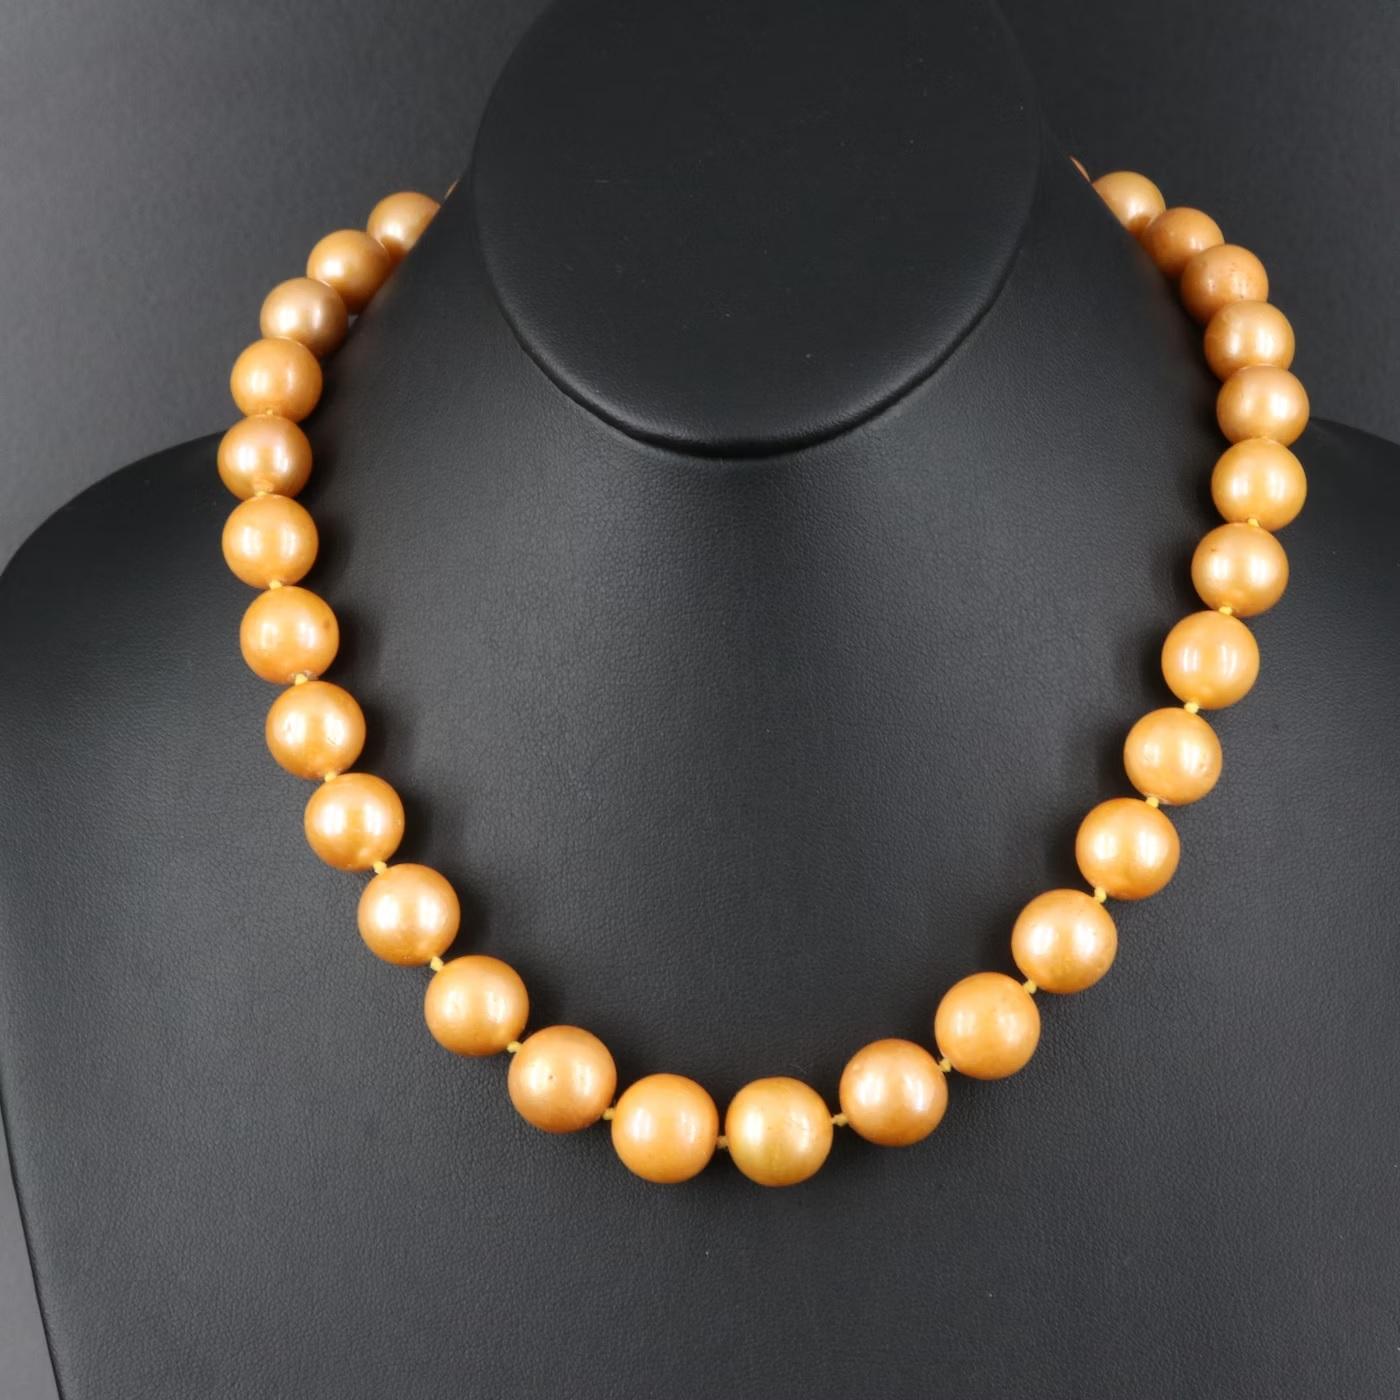 GIA certified Necklace, Comes with GIA certificate #5221017043 

NEW with tags and GIA certificate

Amazing Design with a large pearls:
- Cultured Pearl
- Shape:	Near-Round
- Pearls Dimensions:	10.44 × 10.32 – 13.88 mm
- Certification: GIA Pearl